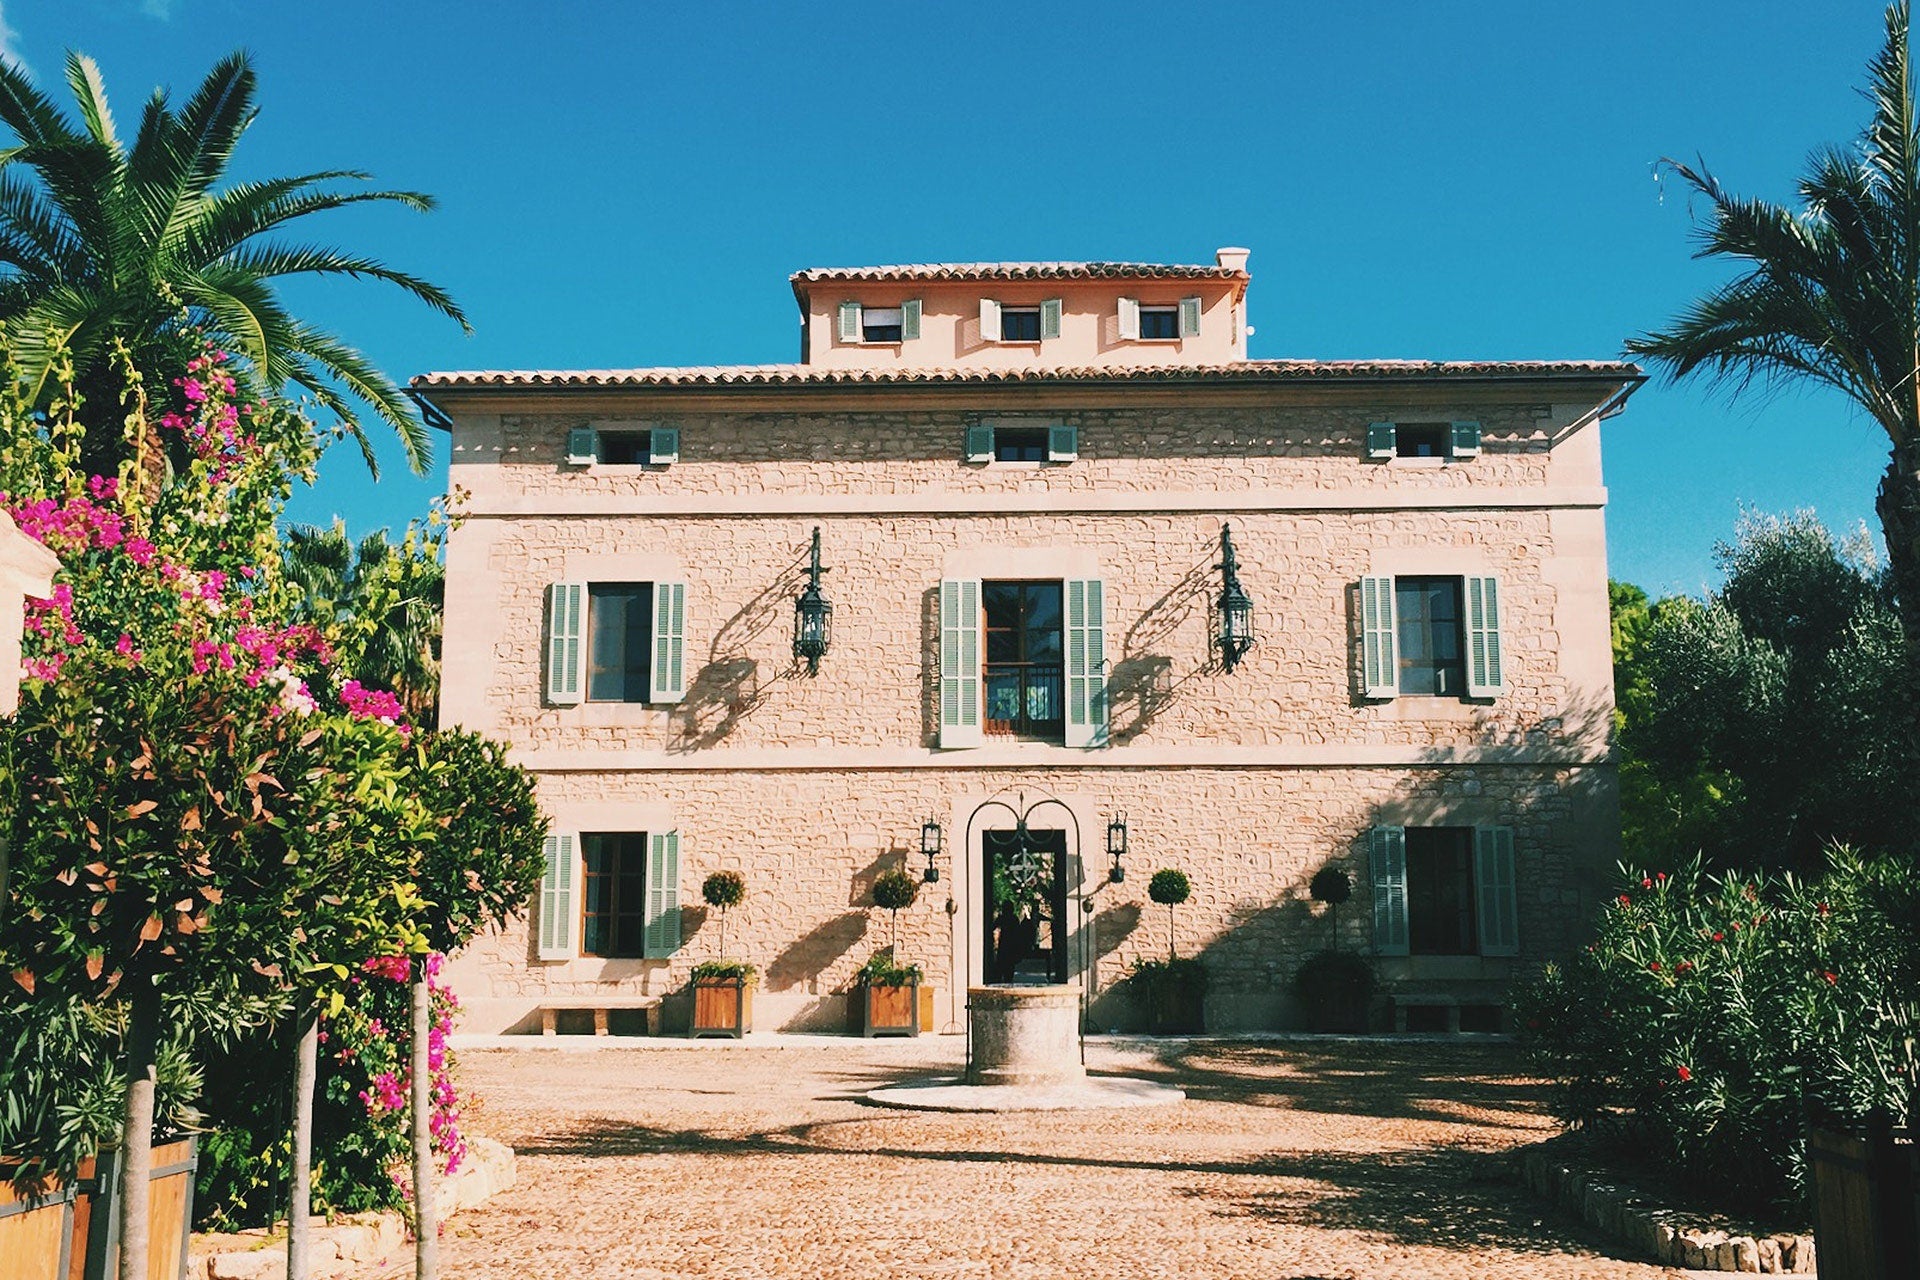 Our "Mallorca Retreat" voted best stay in Condé Nast Traveller!